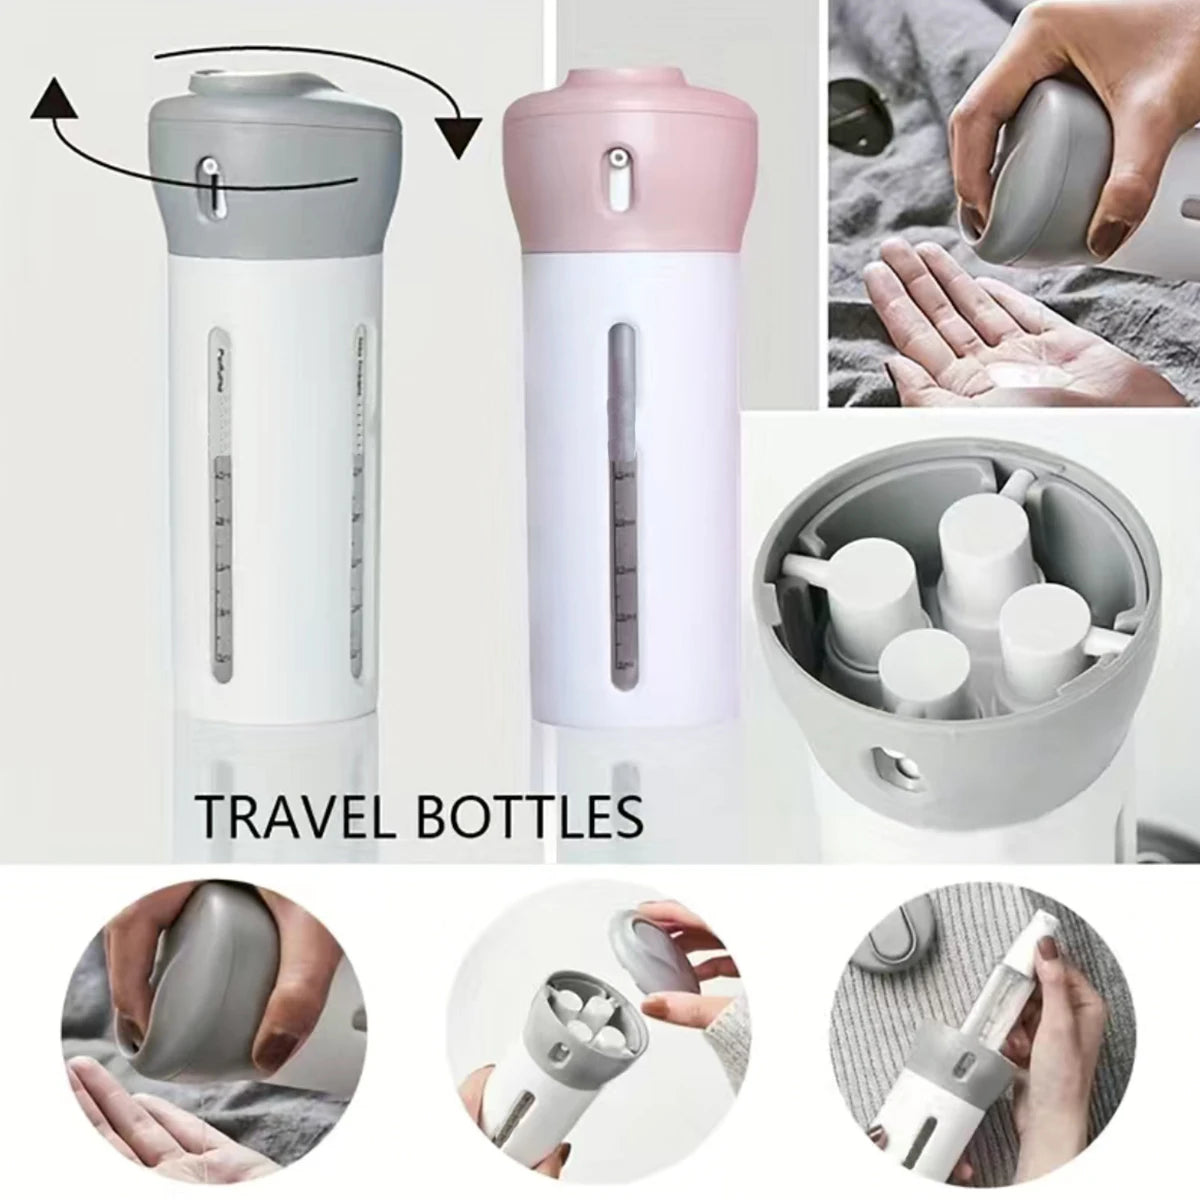 4 x 1 MultiOption Travel Dispenser: Compact Bottle for Shampoo, Conditioner, Lotion and Perfume